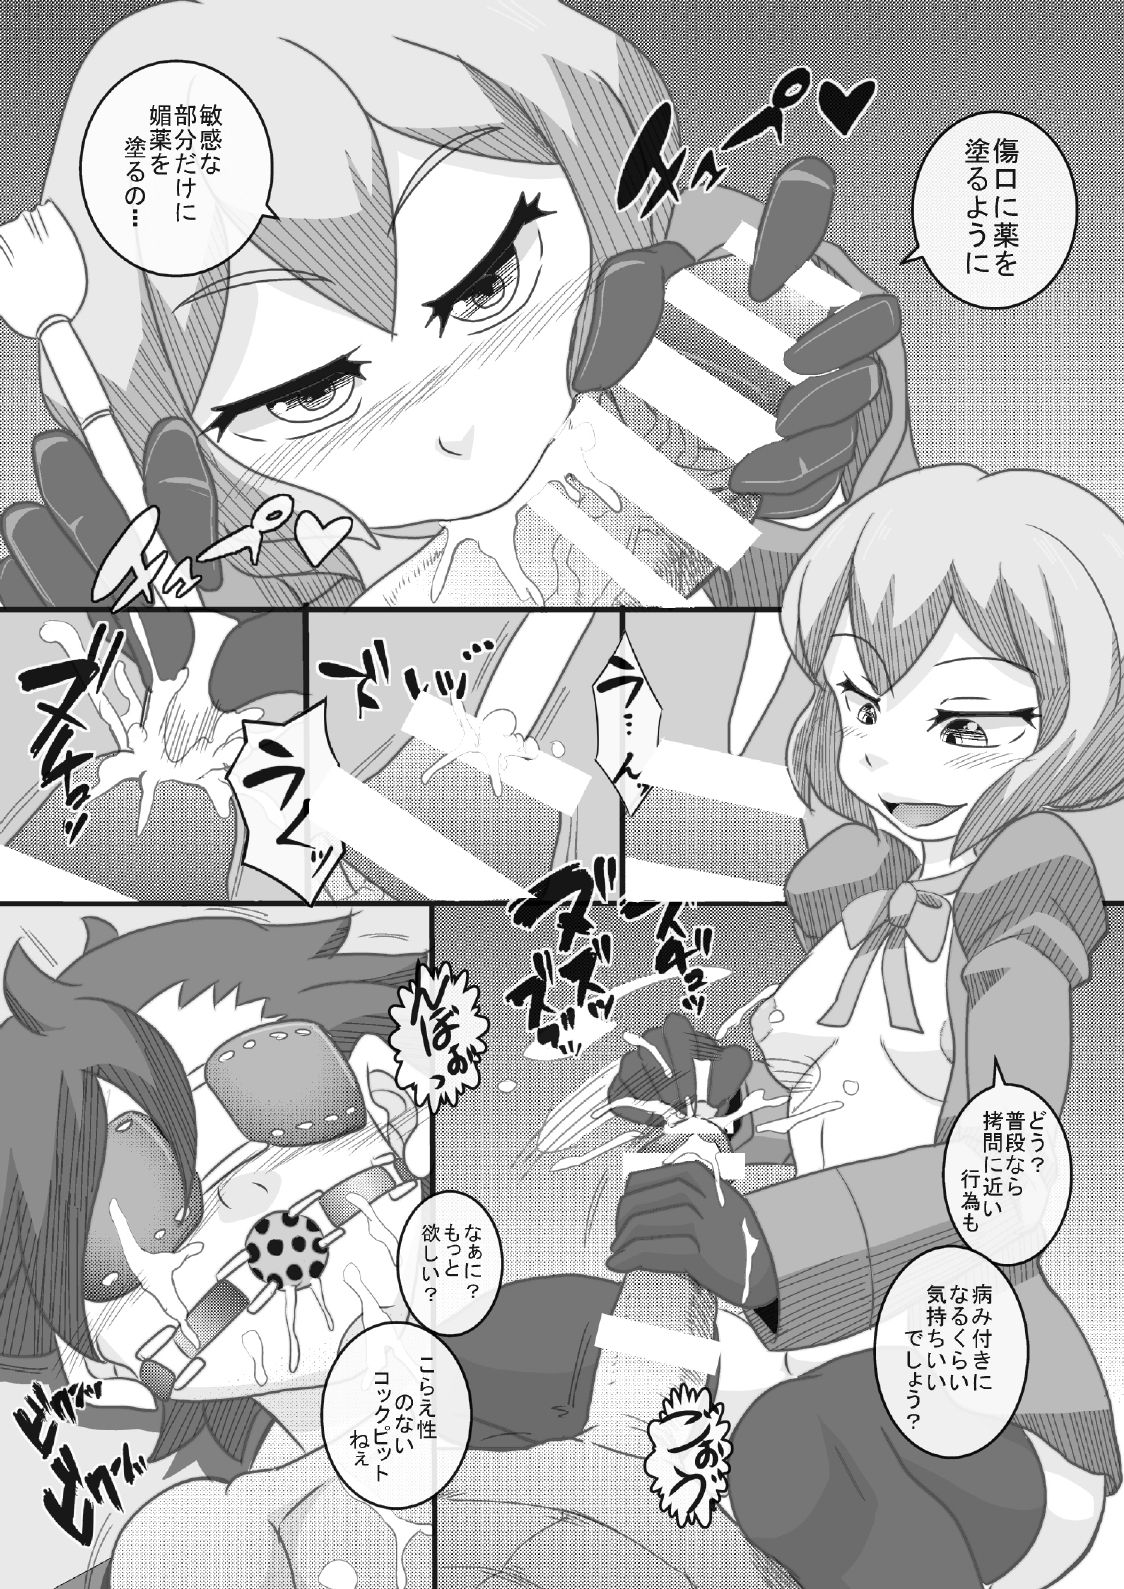 [Seishimentai (Syouryuupen)] Try Nee-chans 2 (Gundam Build Fighters Try) page 5 full